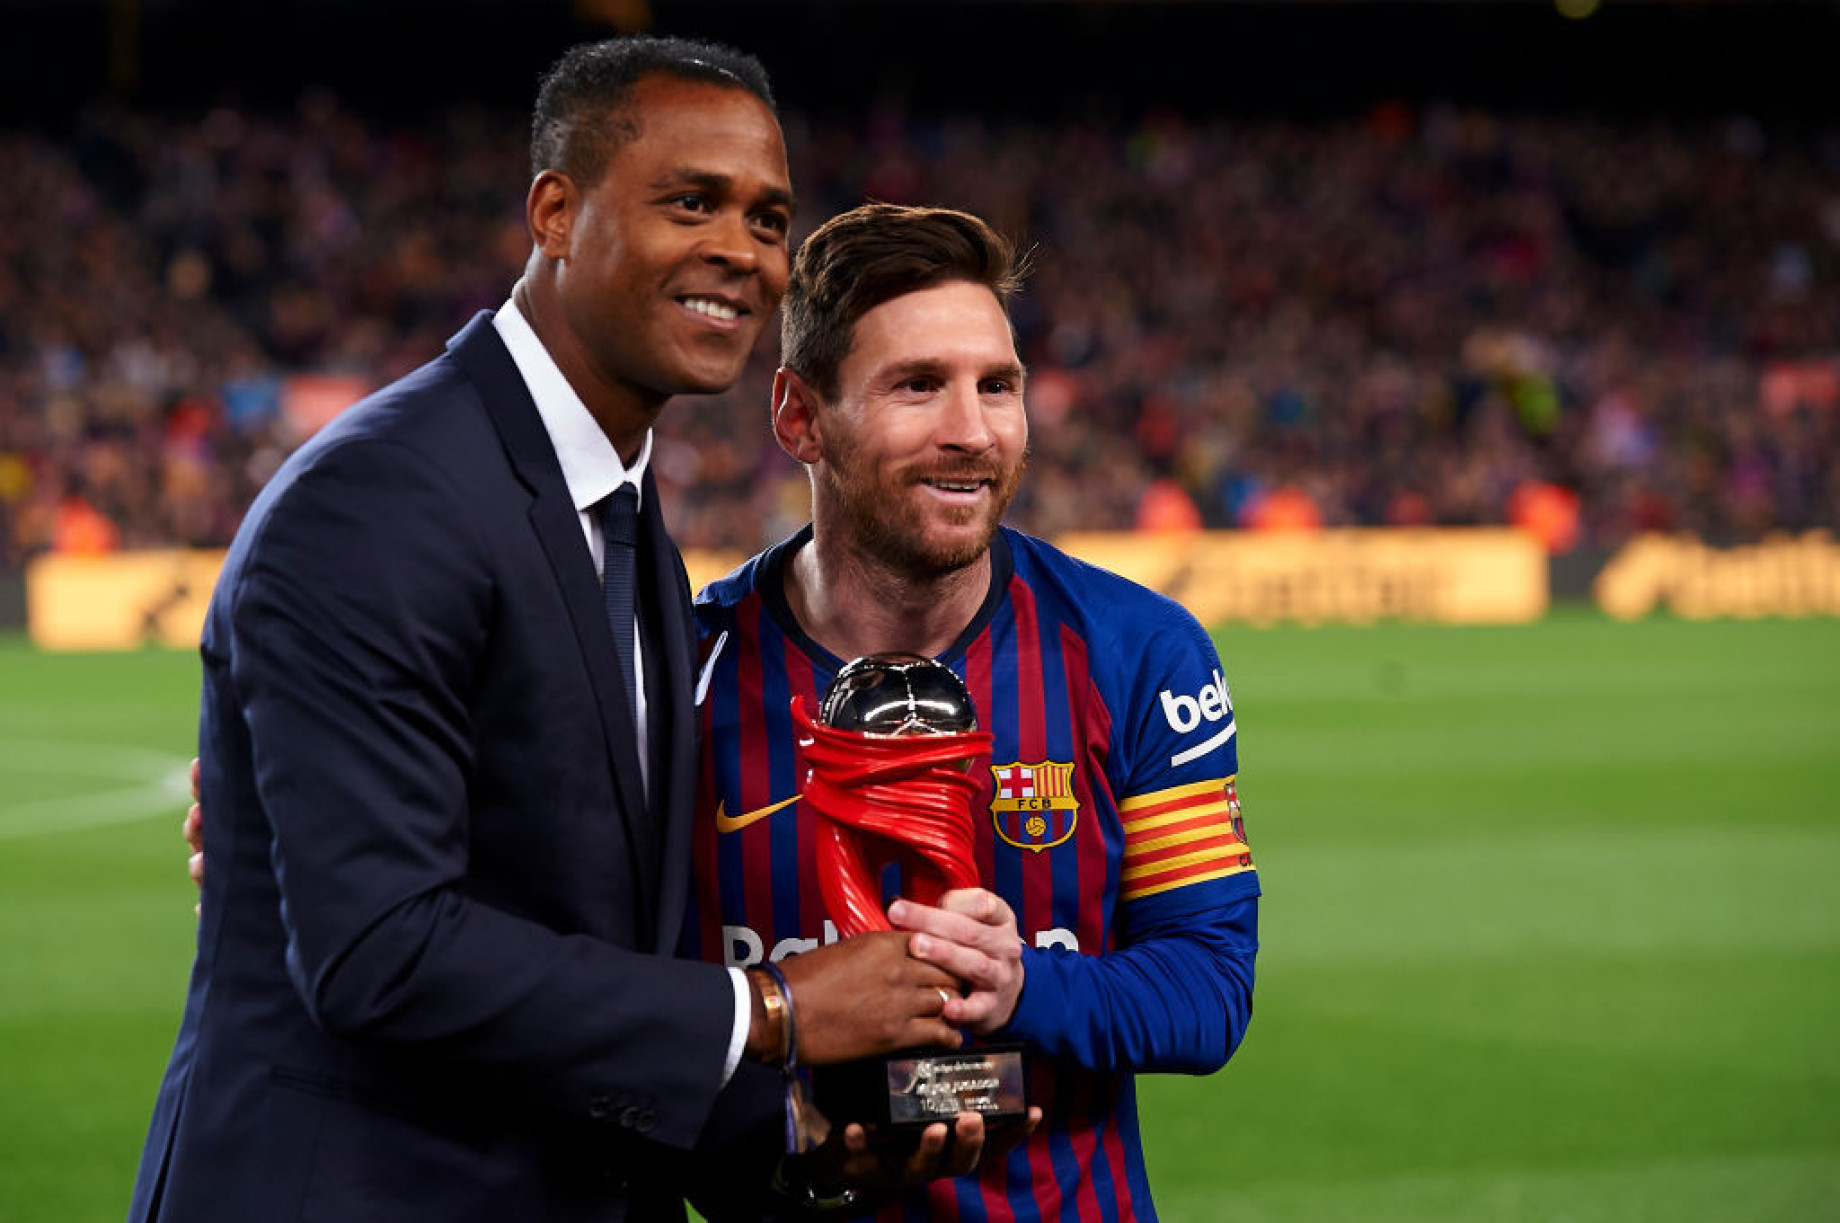 Kluivert_padre_Barcellona_Messi_GETTY.jpg